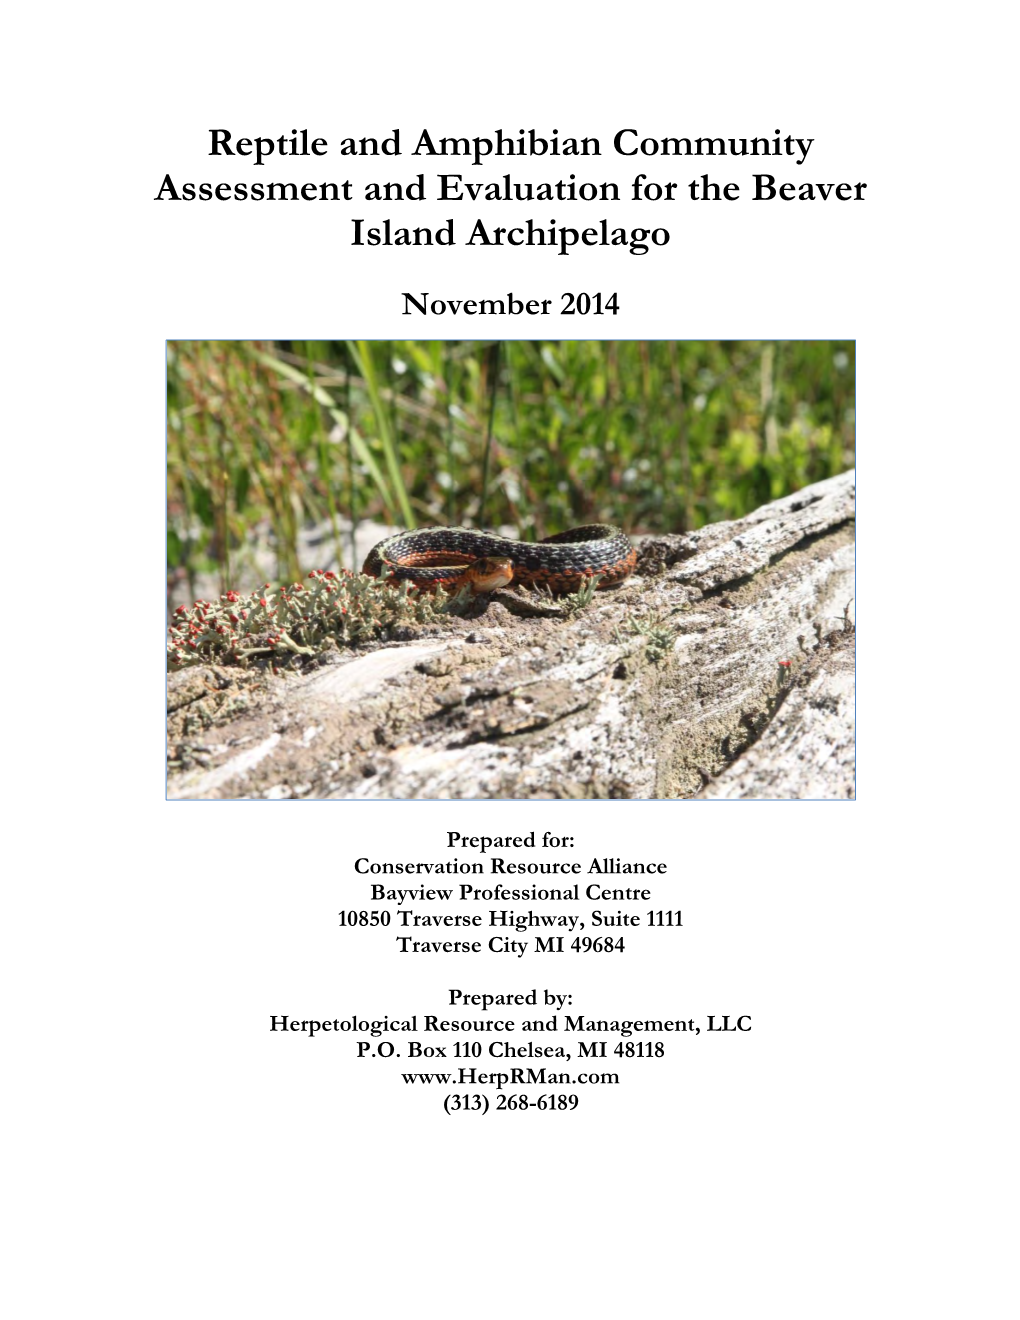 Reptile and Amphibian Community Assessment and Evaluation for the Beaver Island Archipelago